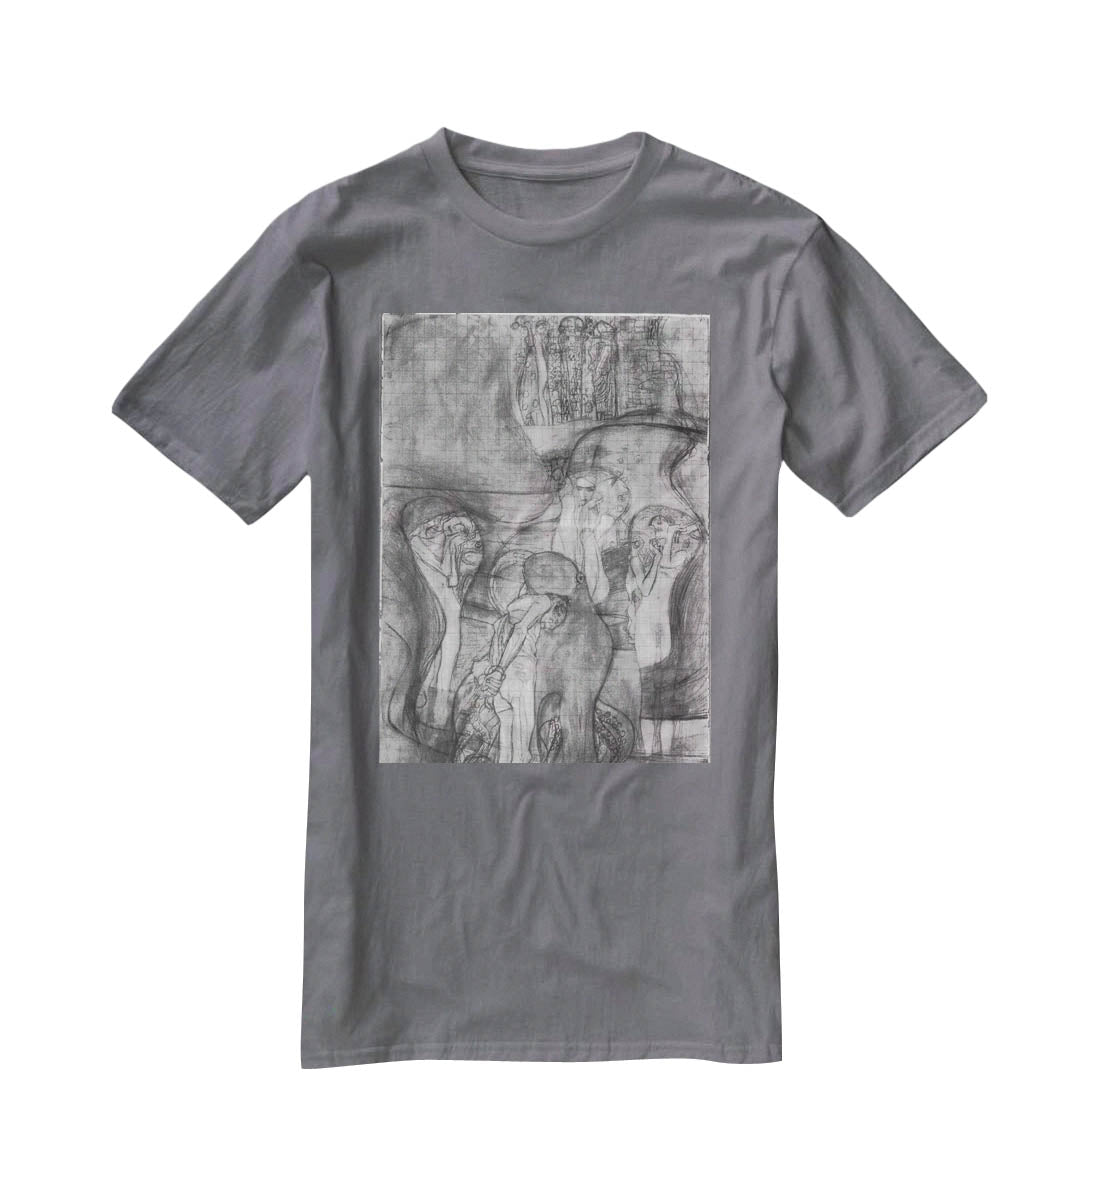 Composition draft of the law faculty image by Klimt T-Shirt - Canvas Art Rocks - 3